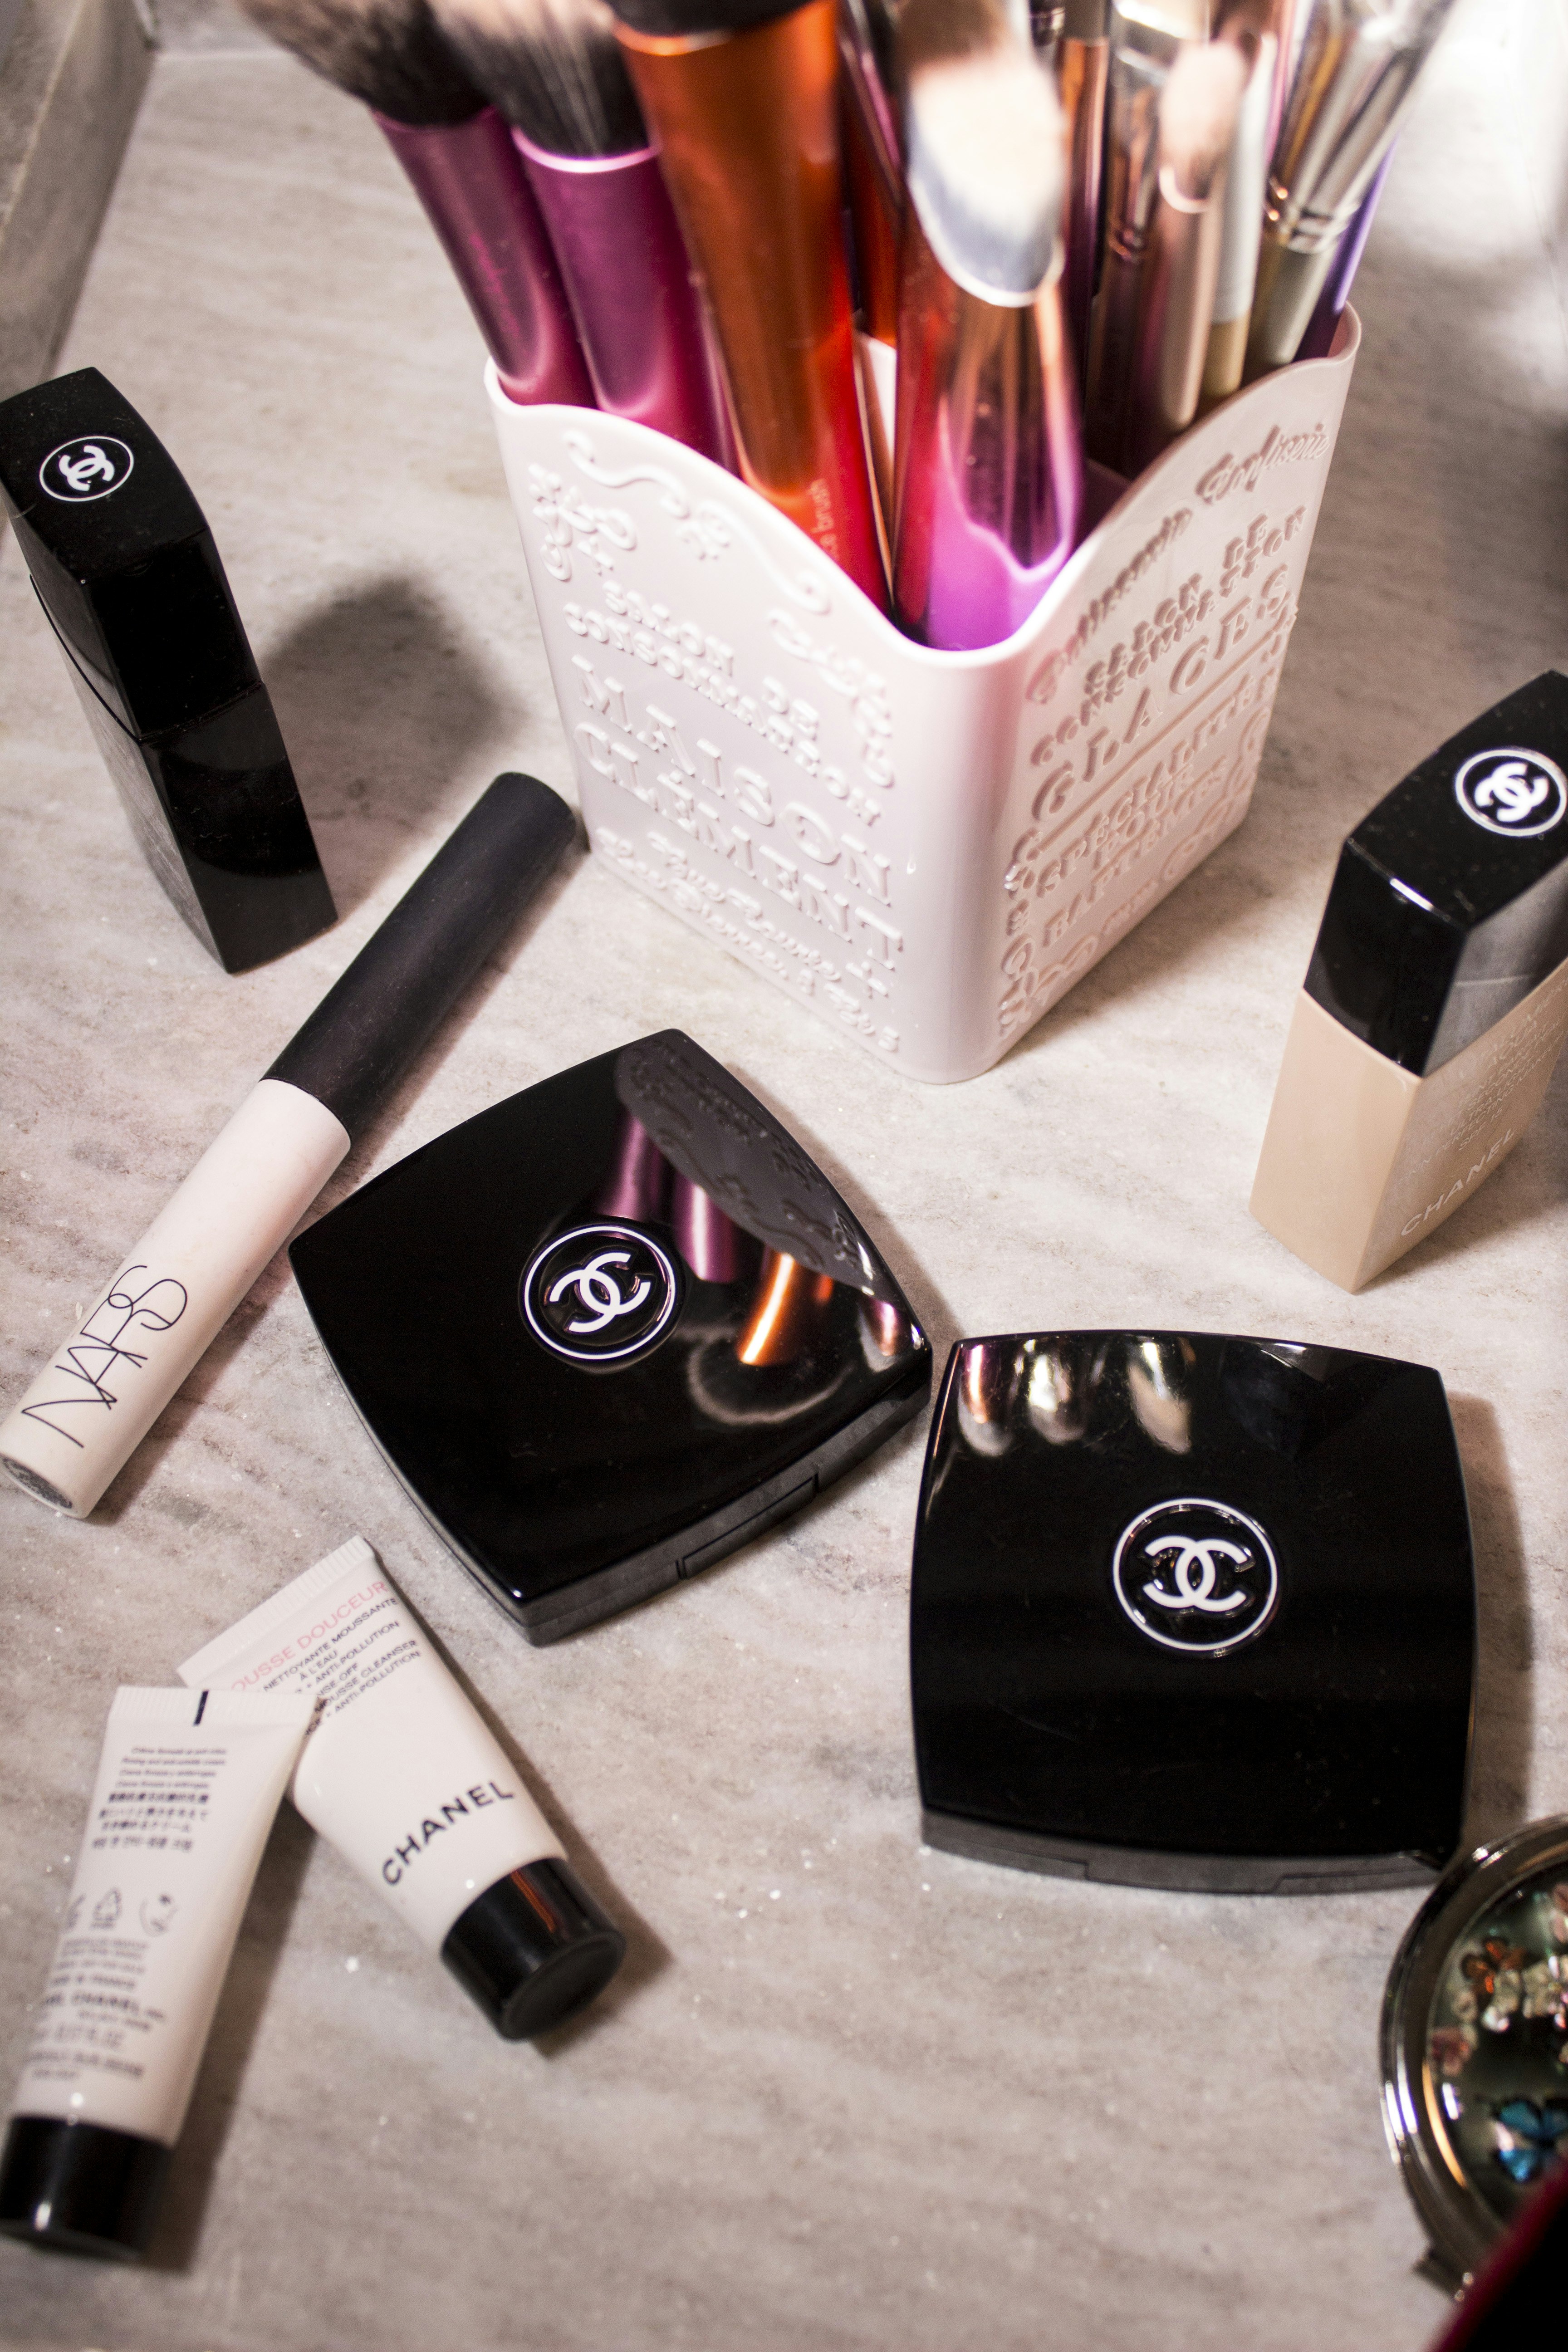 Top 5 Chanel Makeup Products - Domesticated Me